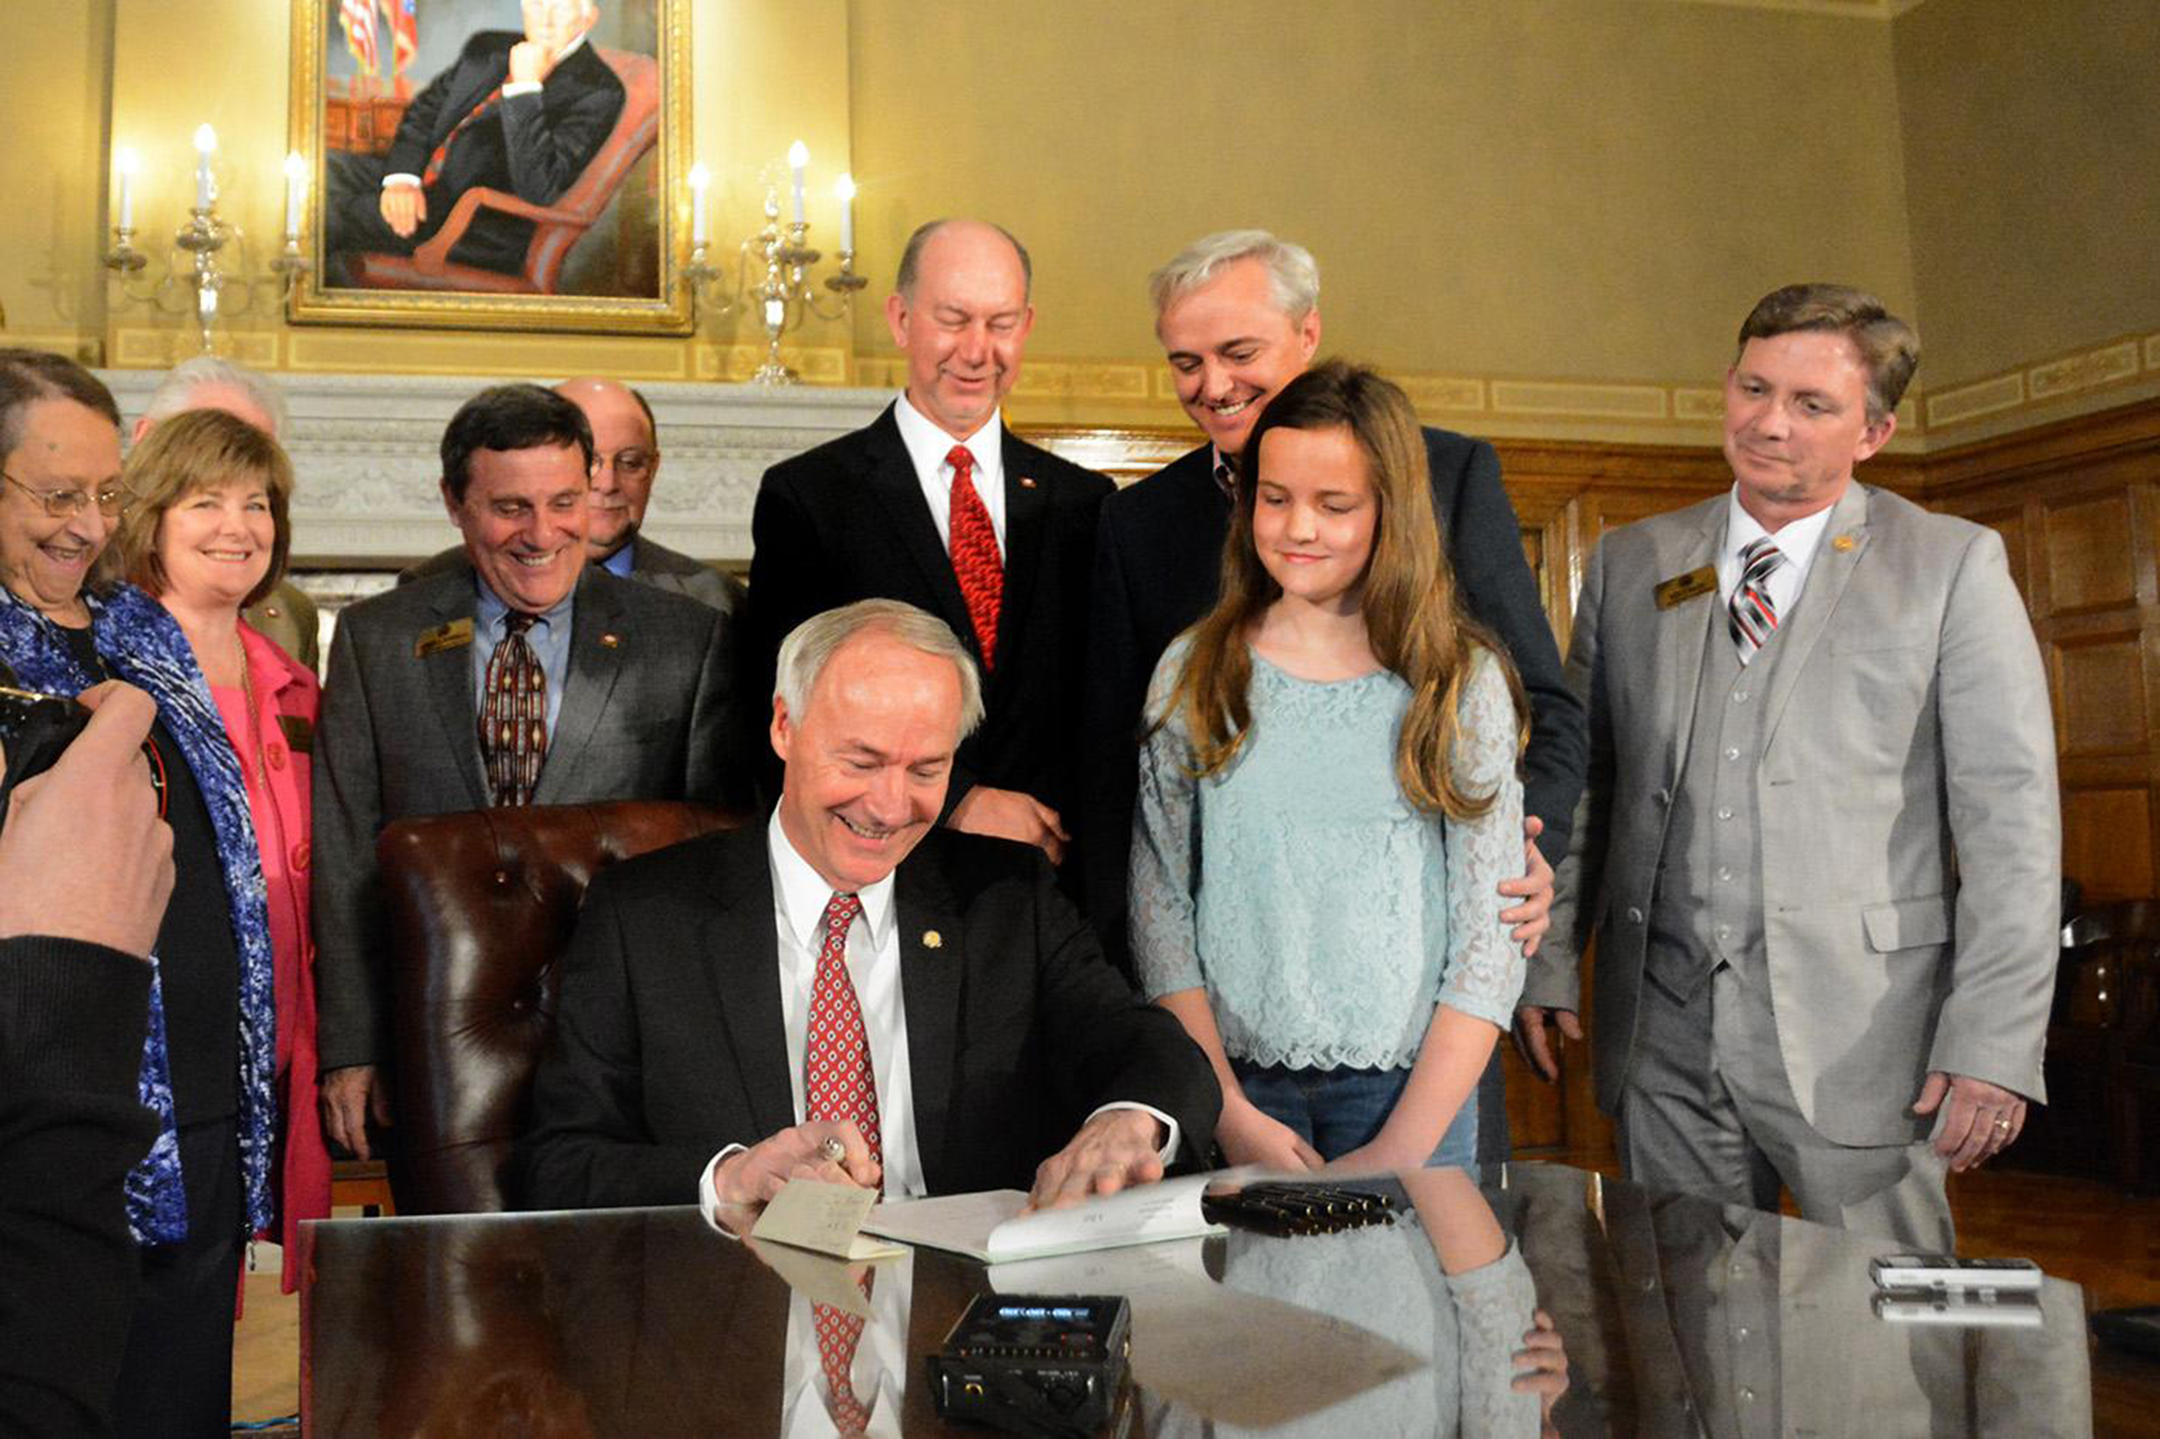 Asa Hutchinson smiles while seated at a table sighing legislation, surrounded by nine onlookers